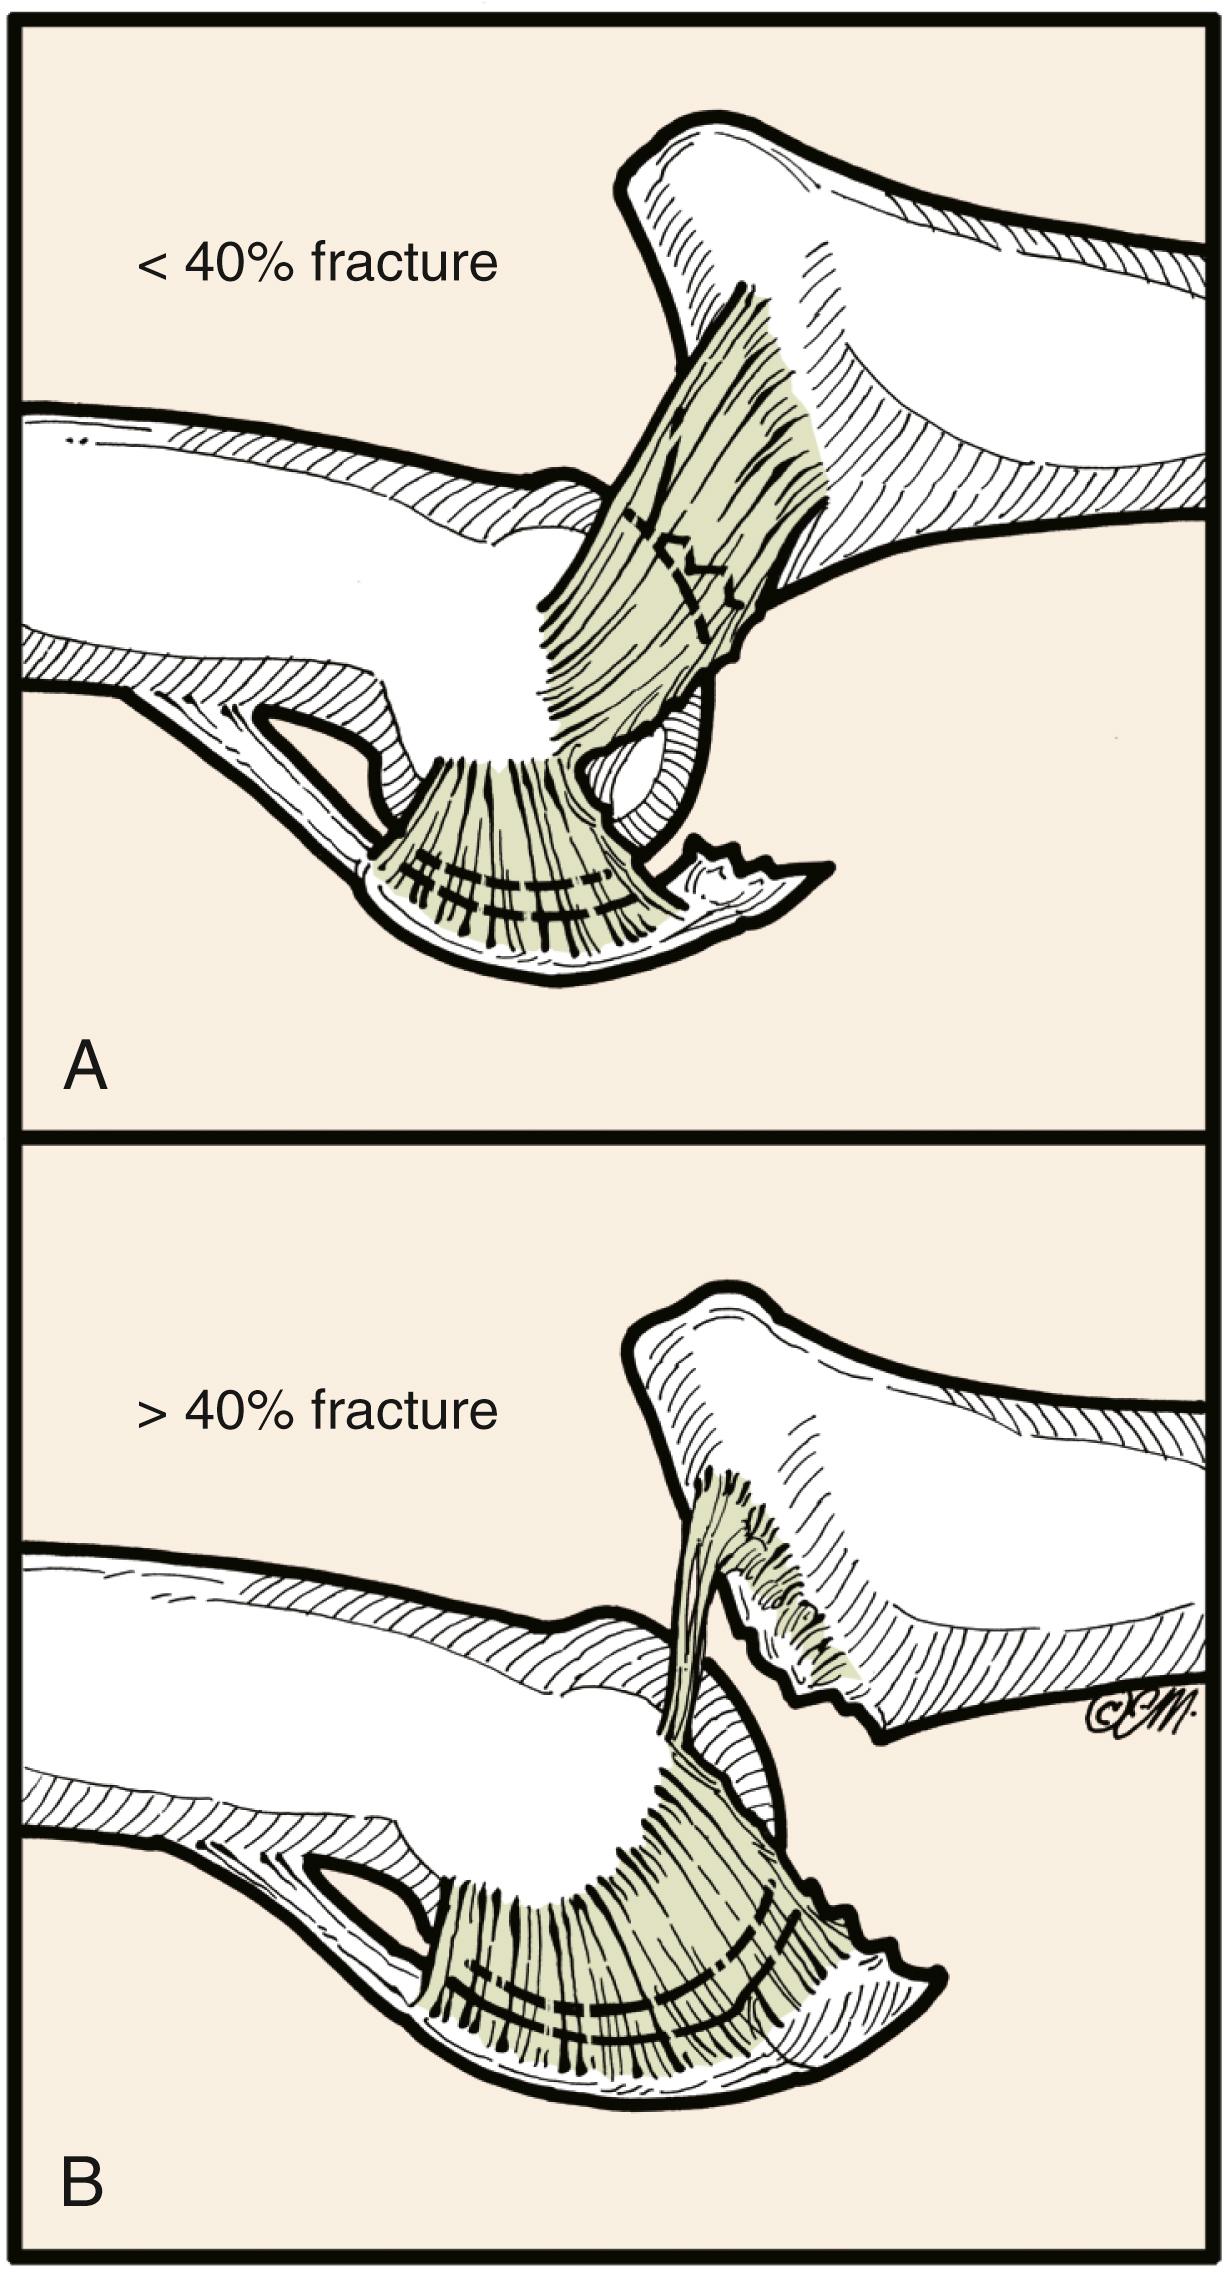 Fig. 8.4, A, Fracture-dislocation with less than 40% of proximal articular surface allows some collateral ligament attachment to middle phalanx. B, A fracture-dislocation with more than 40% involvement of the middle phalangeal articular surface ensures that the collaterals are attached only to the fragment and not to the phalanx. The injury is unstable without operative fixation.